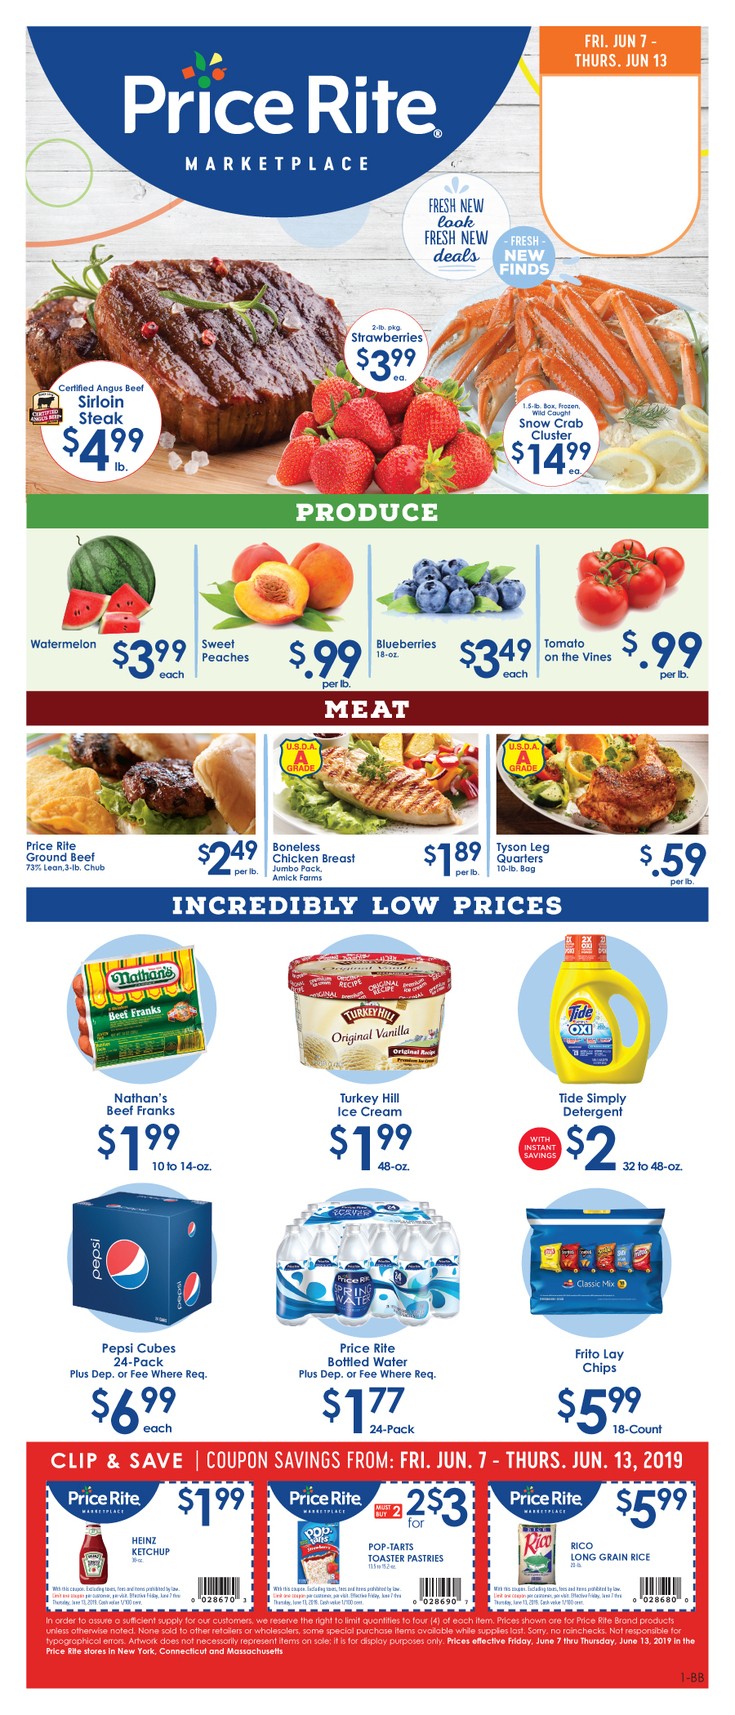 Price Rite Weekly Ad from June 7